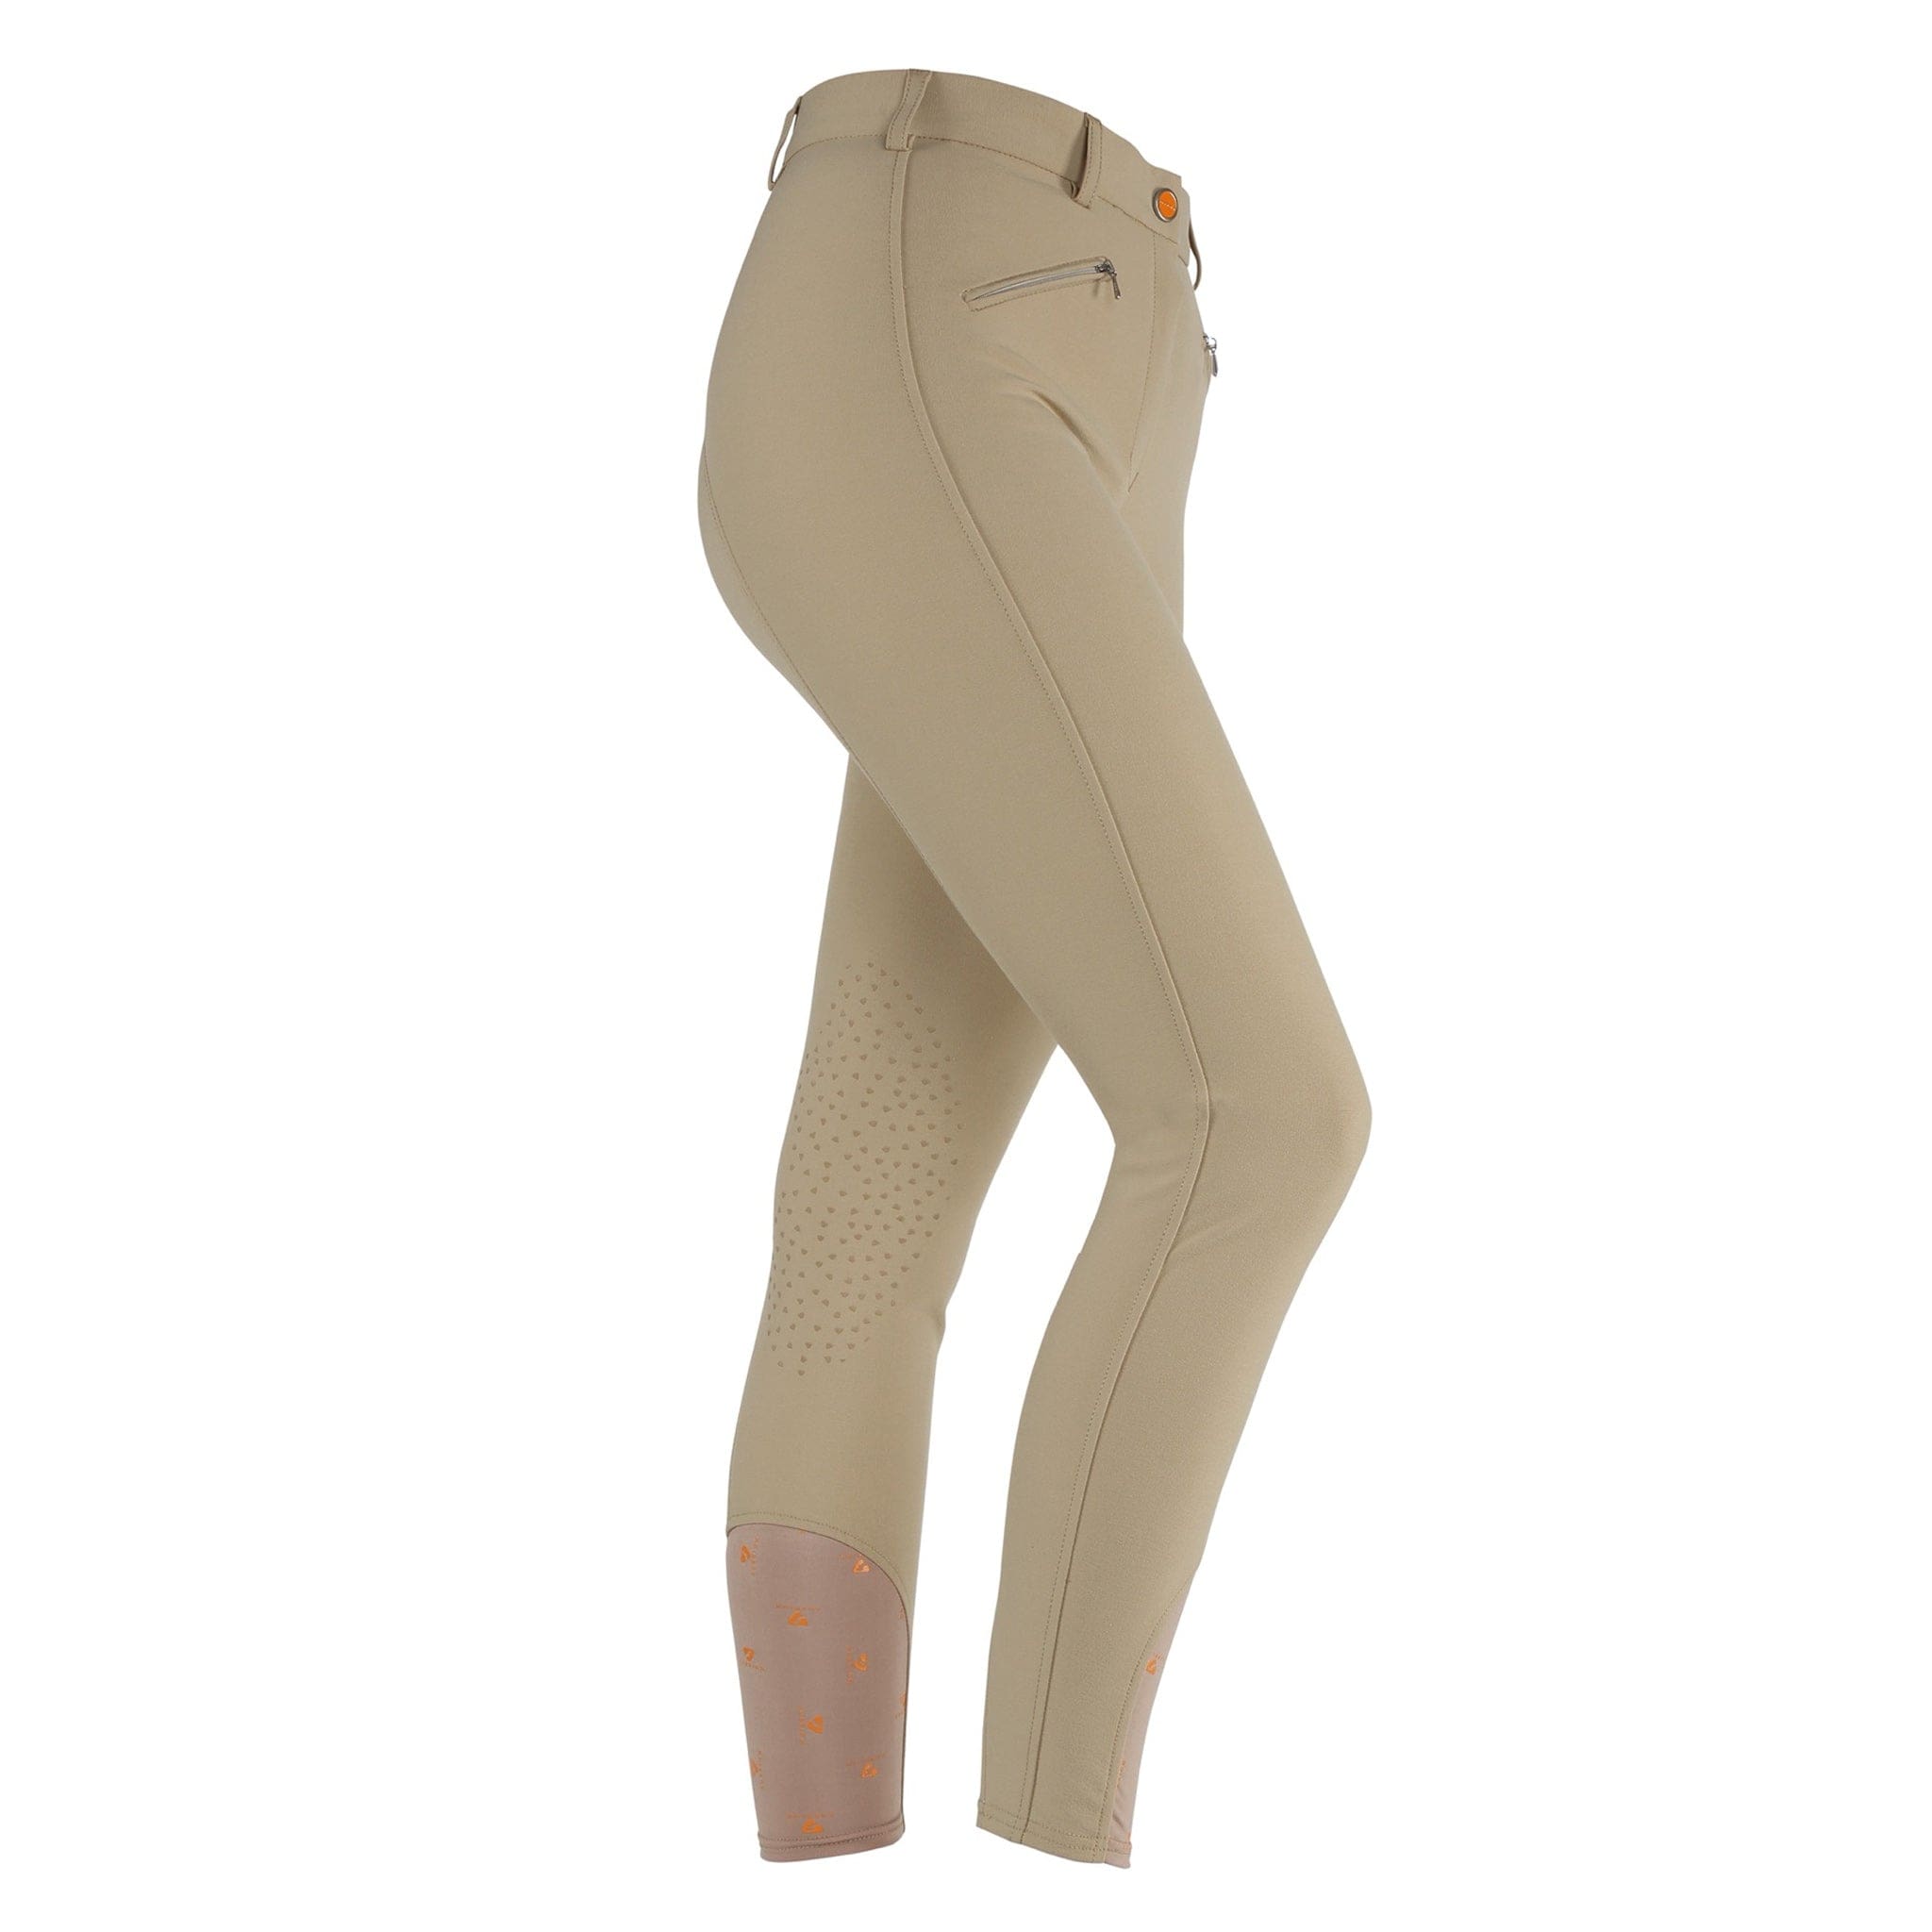 Aubrion Children's Thompson Competition Silicone Knee Patch Breeches